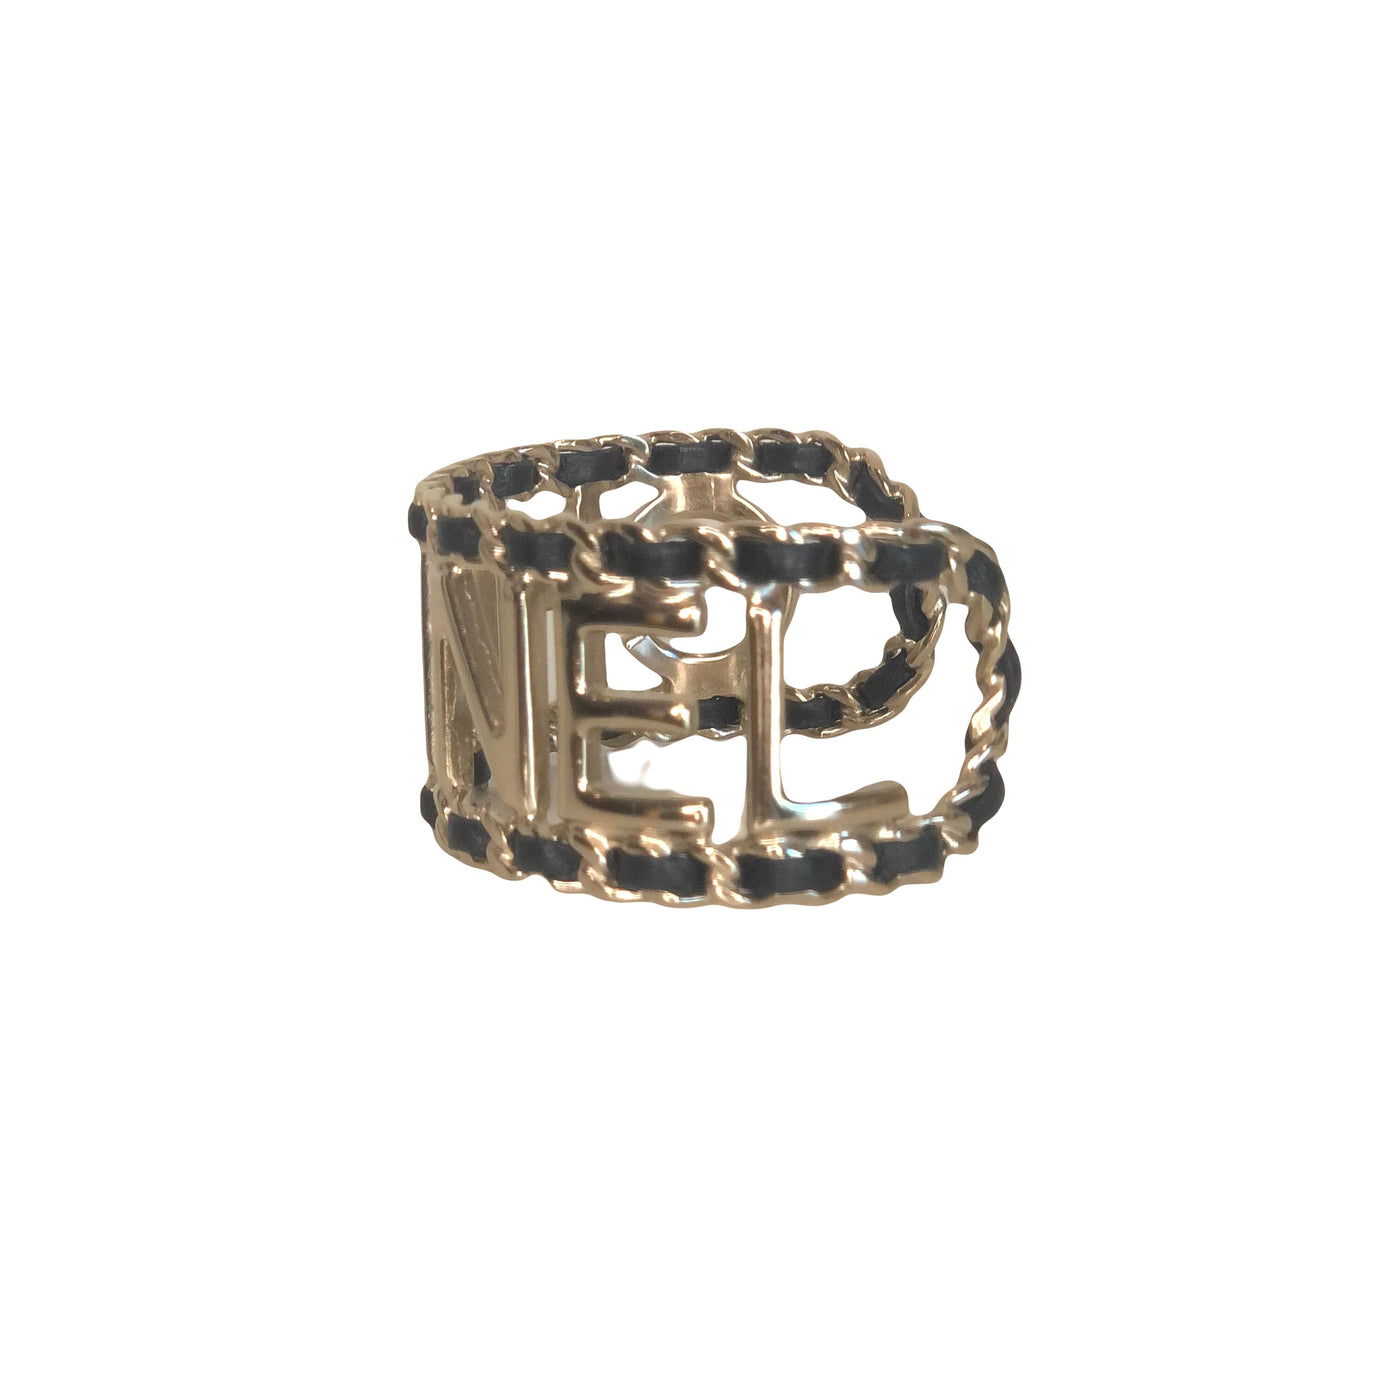 CHANEL light gold hardware with leather intertwined cuff size L 2020